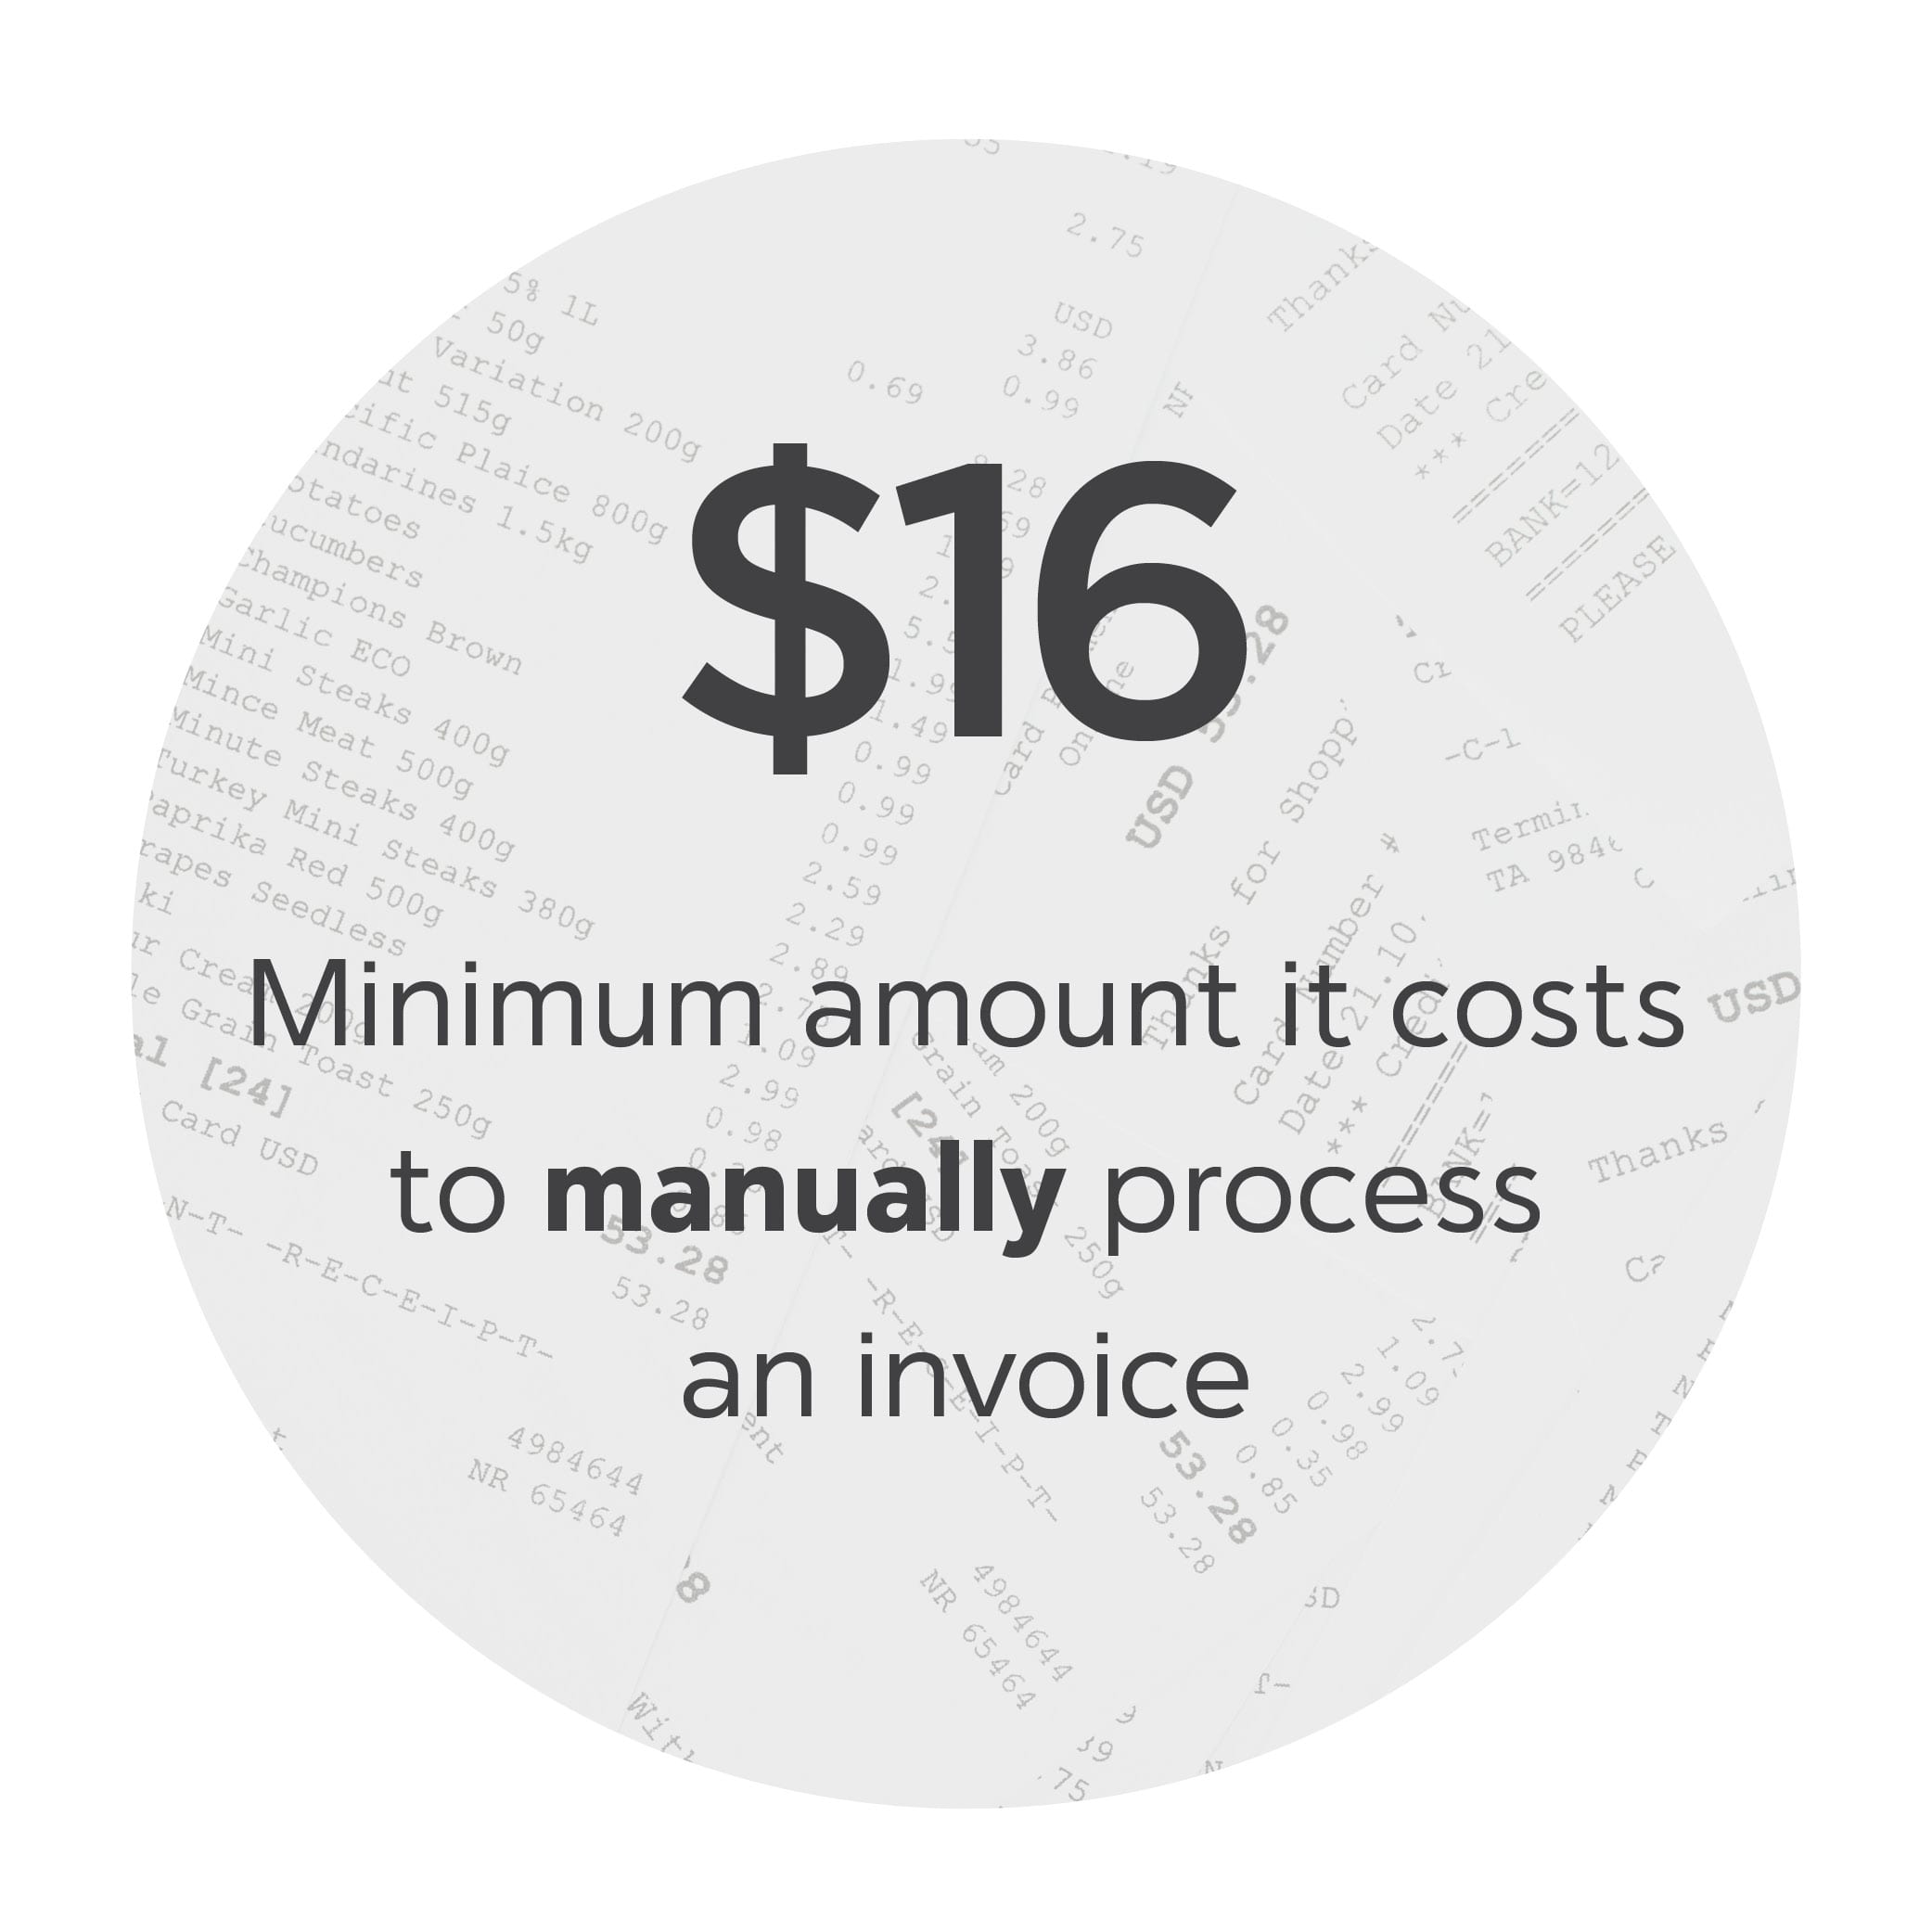 $16: Minimum amount it costs to manually process an invoice